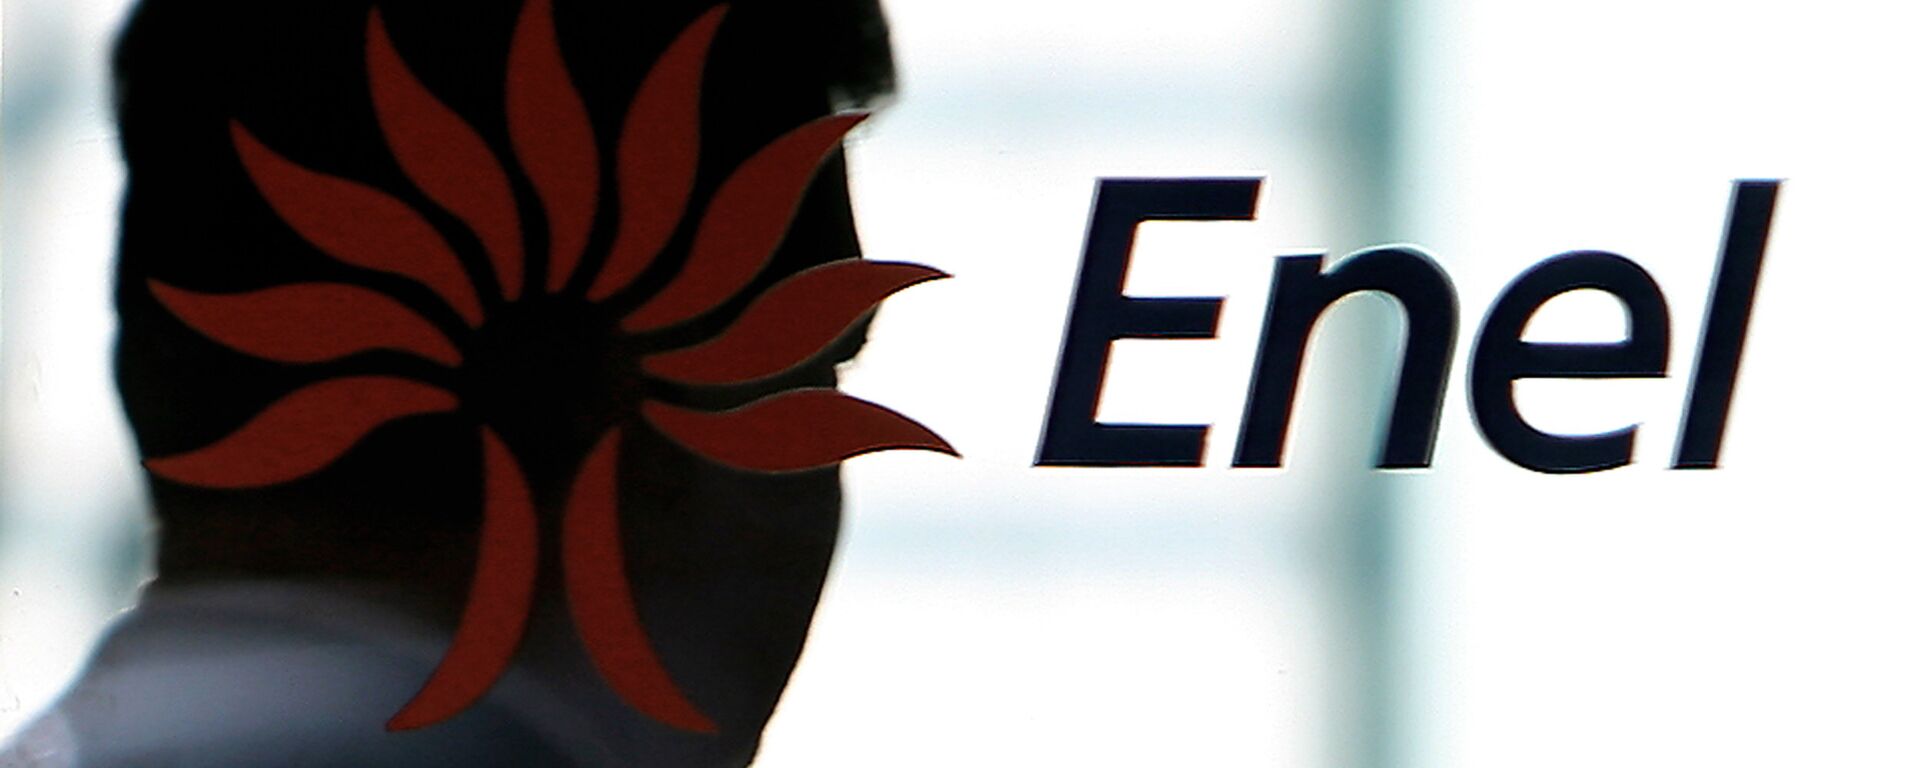 A man passes by Enel's logo at the Italian energy company's headquarters downtown Rome, 01 March 2007 - Sputnik Mundo, 1920, 23.11.2022